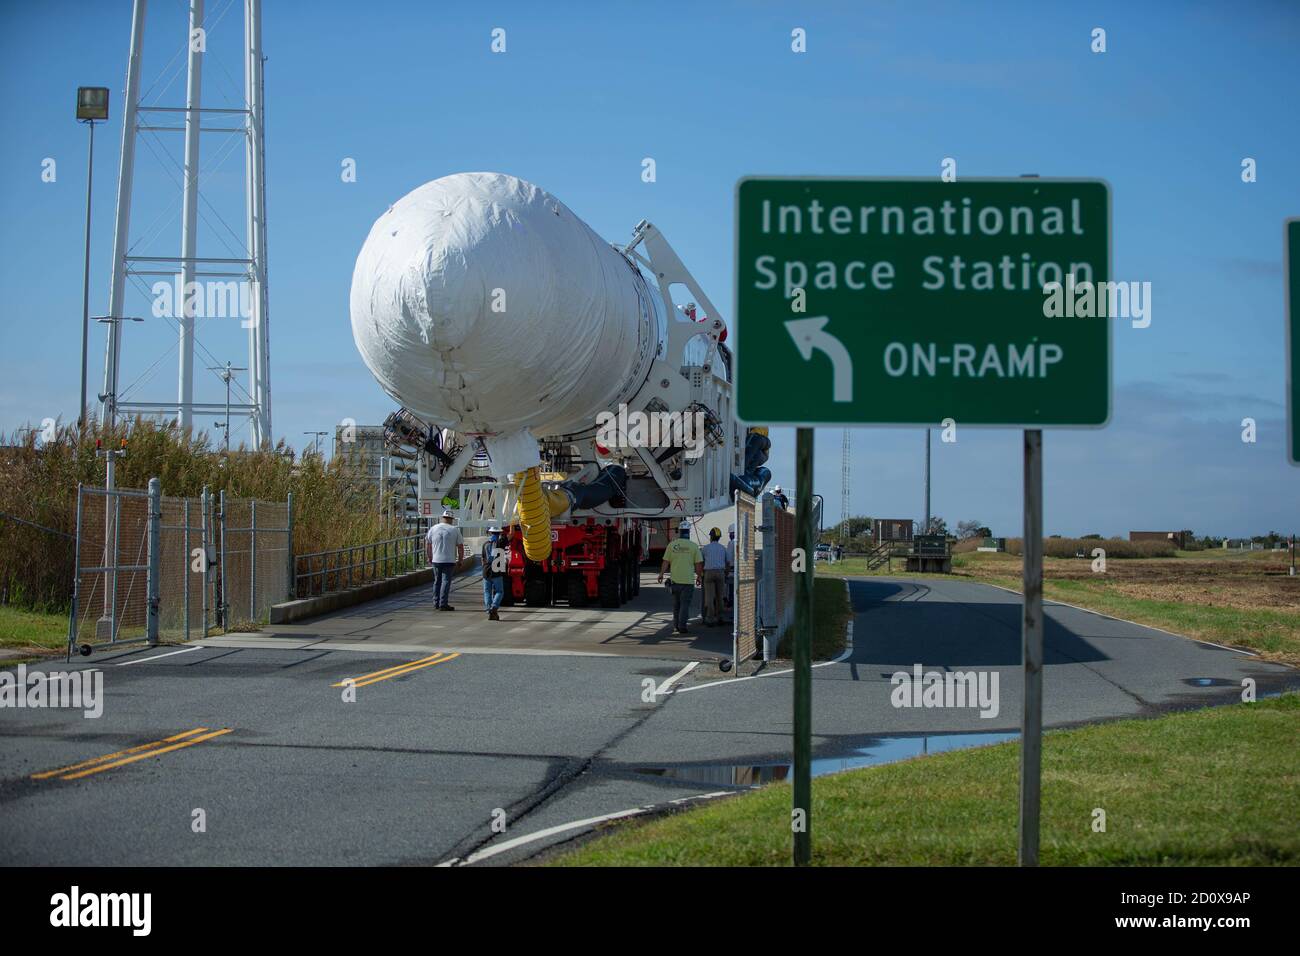 The Northrop Grumman Antares rocket, with Cygnus resupply spacecraft onboard, is rolled out of the Horizontal Integration Facility on its way to the Mid-Atlantic Regional Spaceport Launch Pad-0A at the NASA Wallops Flight Facility September 26, 2020 in Wallops, Virginia. The commercial cargo resupply mission is carrying 8,000 pounds of supplies and equipment to the International Space Station. Stock Photo